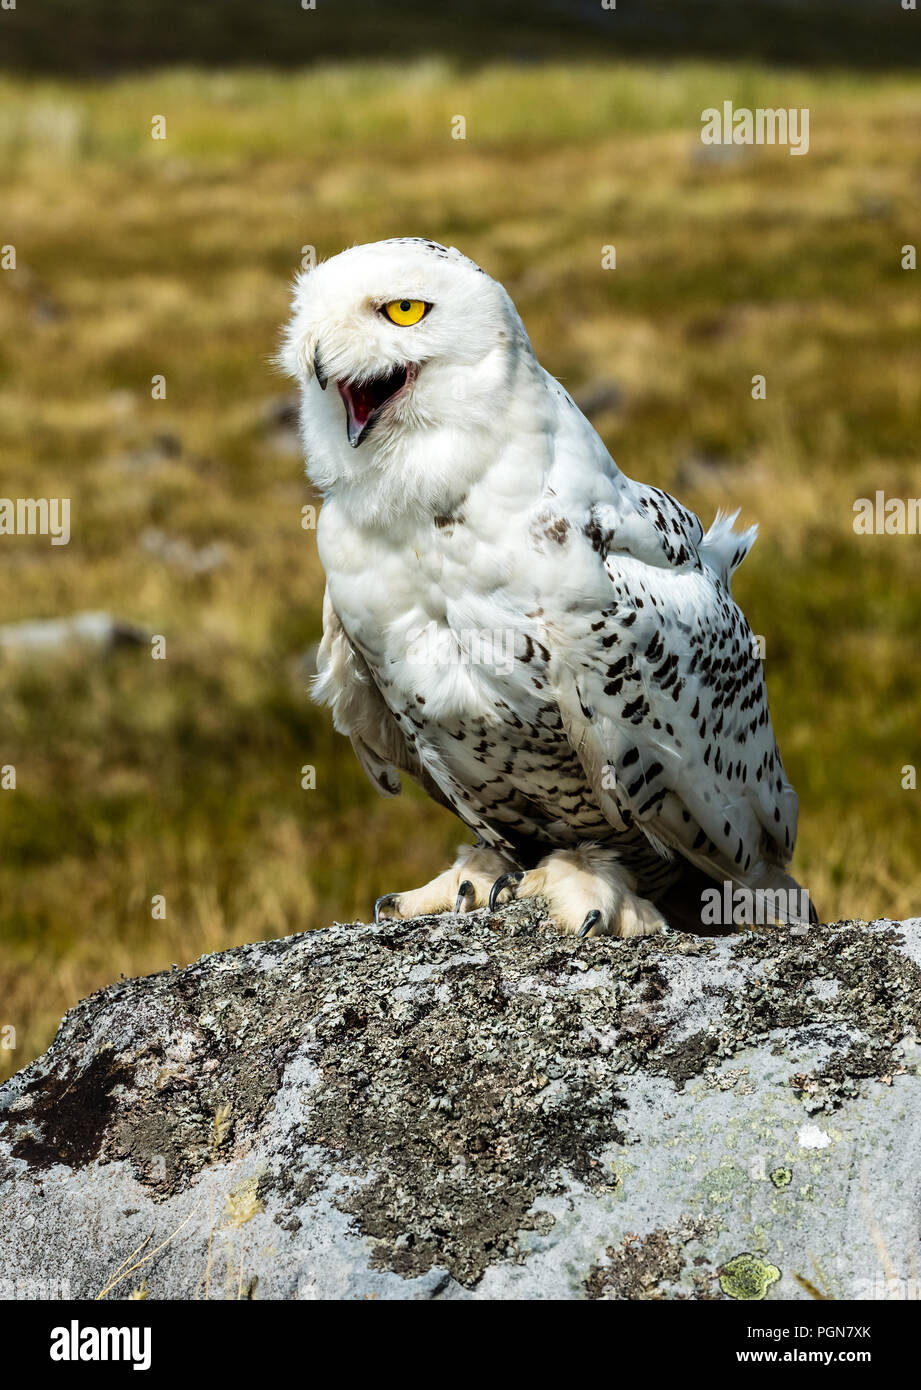 Owl, large, white, snowy owl with laughing, comical face.  Scientific name: Scandiacus bubo.  Portrait. Stock Photo